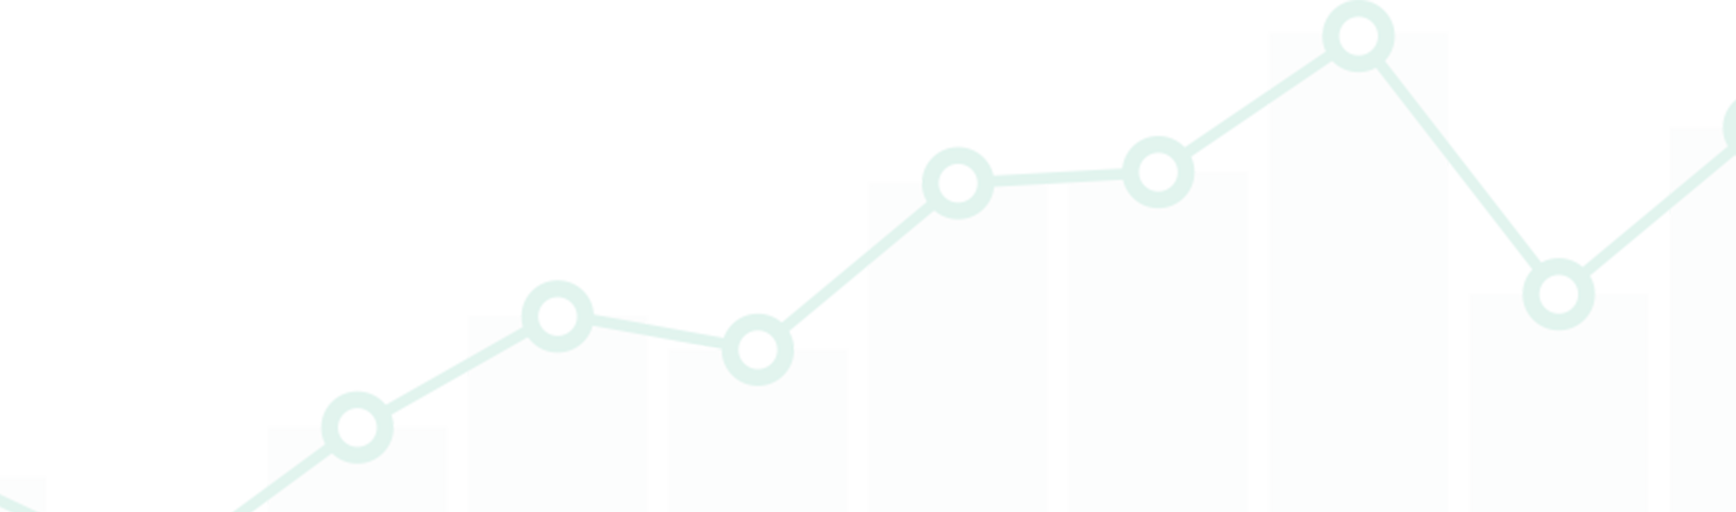 a stylized bar and line graph 